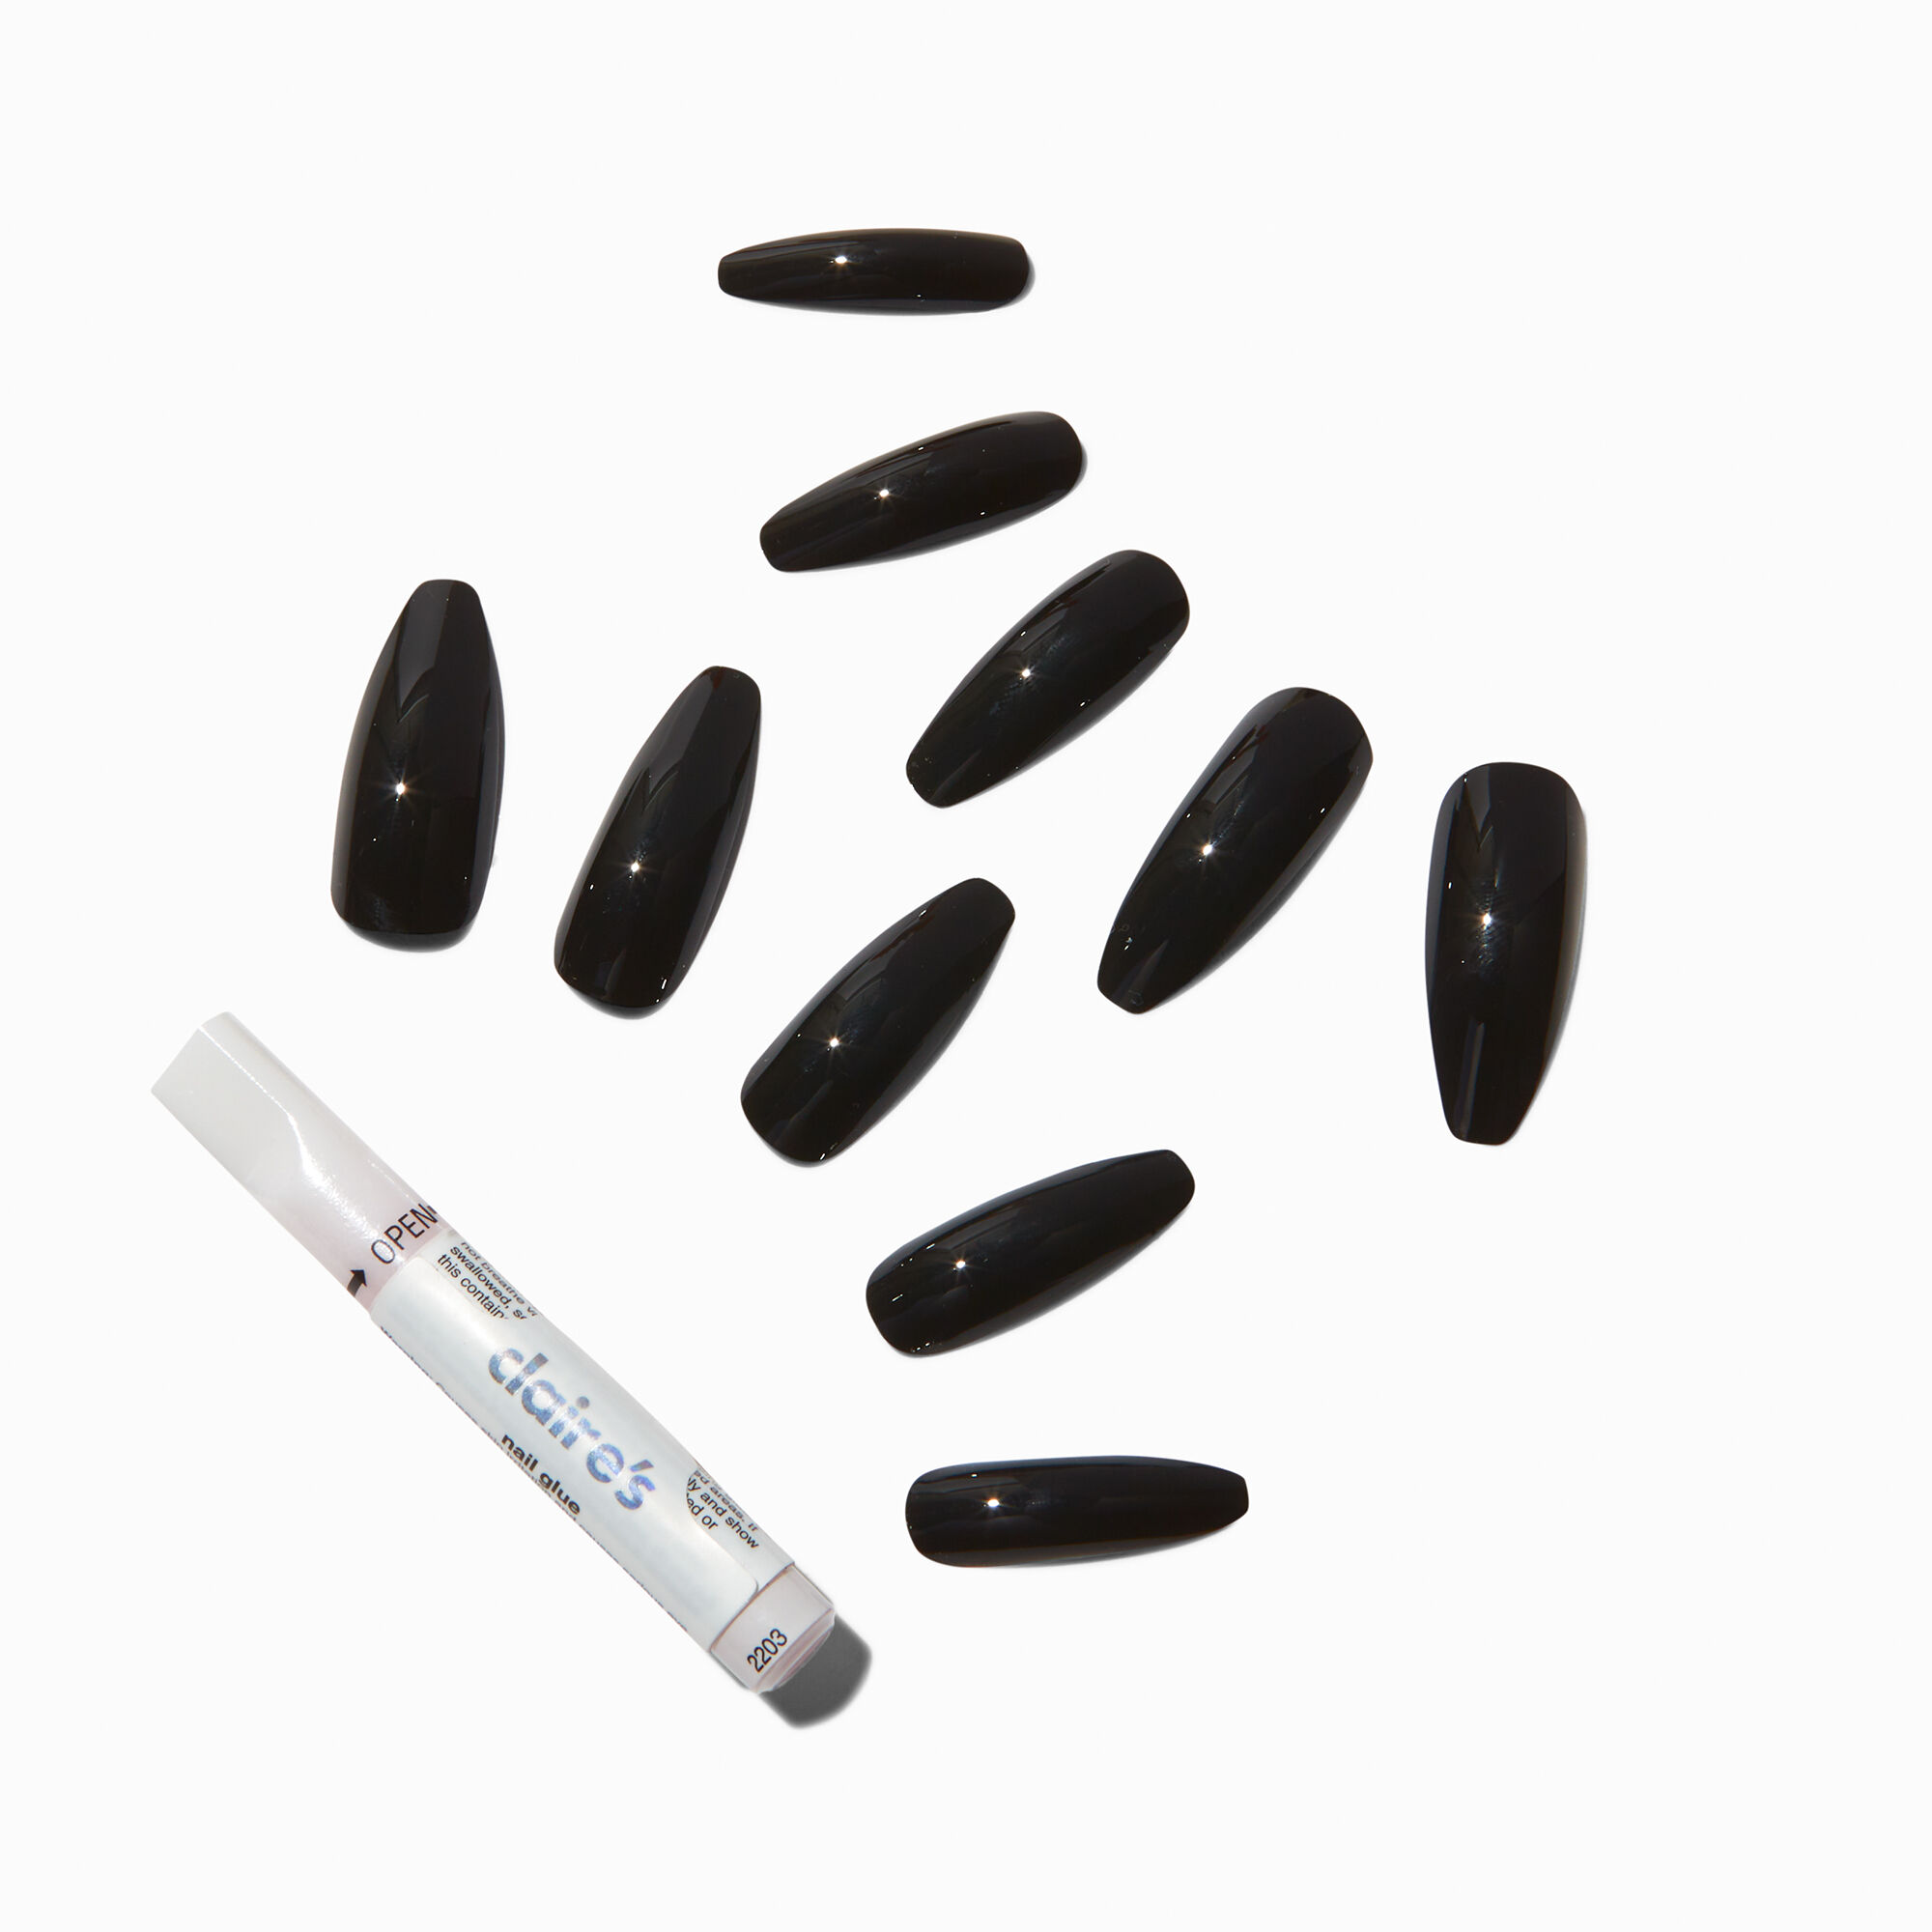 View Claires Glossy Xl Stiletto Vegan Faux Nail Set 24 Pack Black information